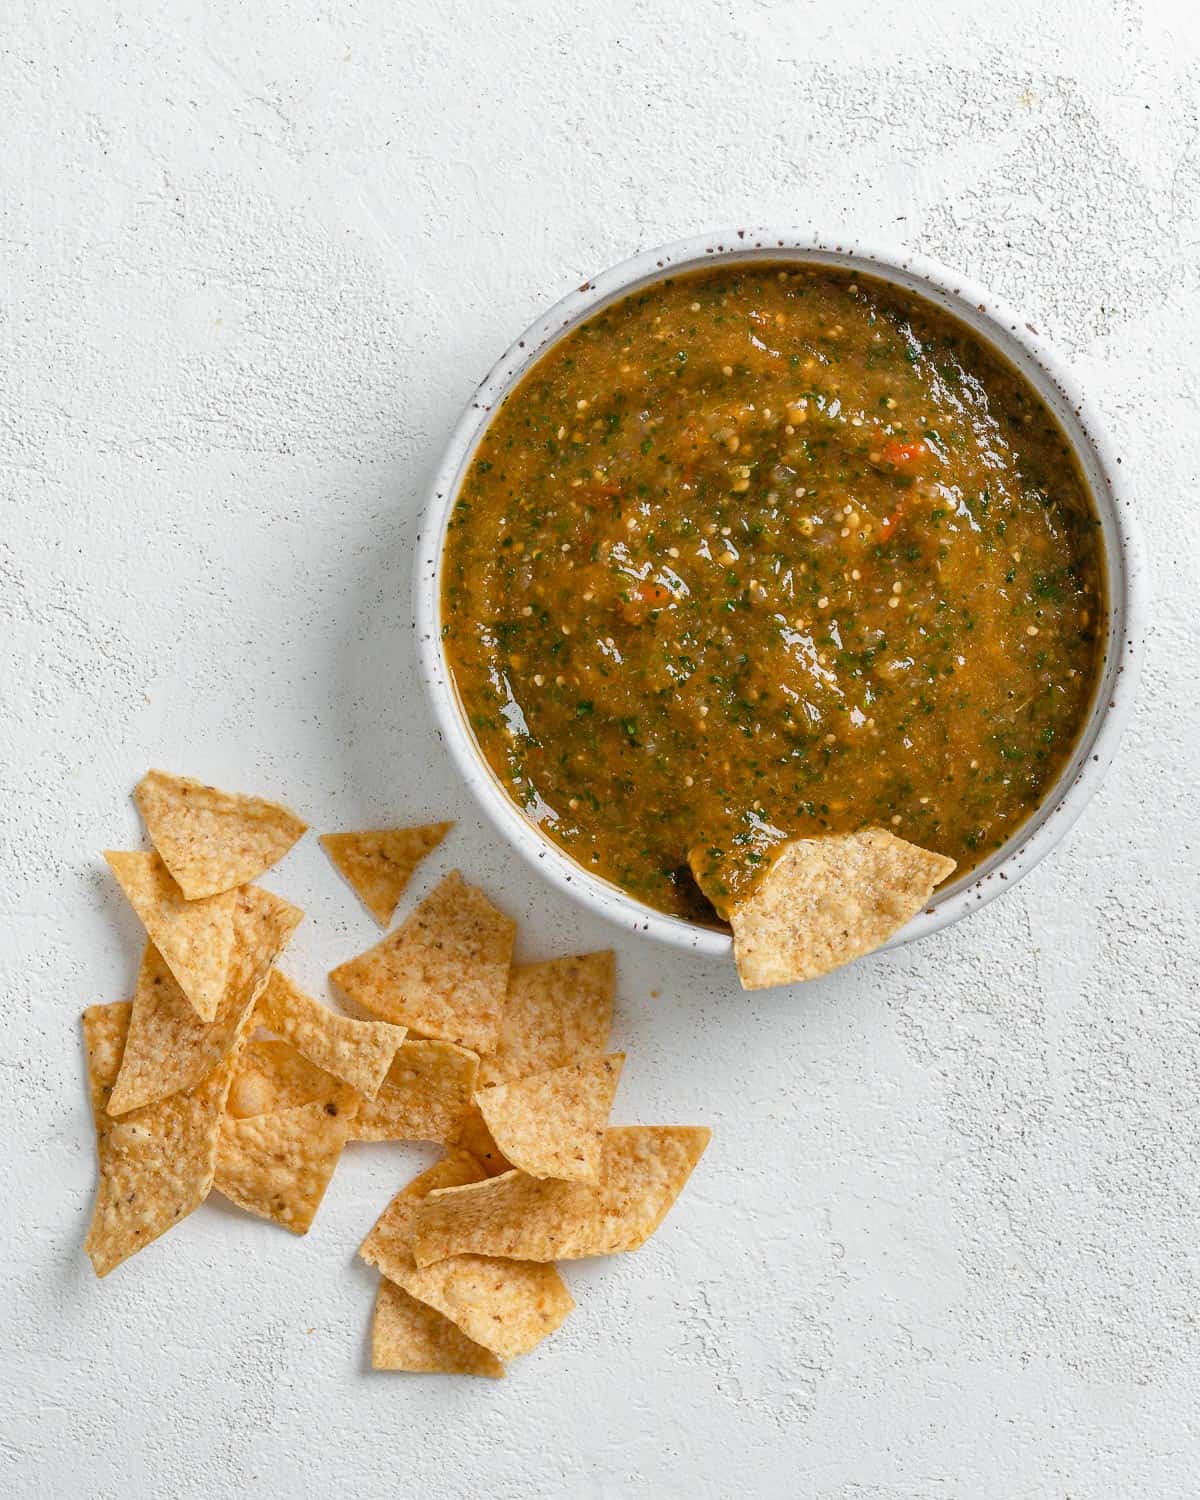 completed Stovetop Tomatillo Salsa in a bowl with a chip being dipped in it and chips scattered on the side